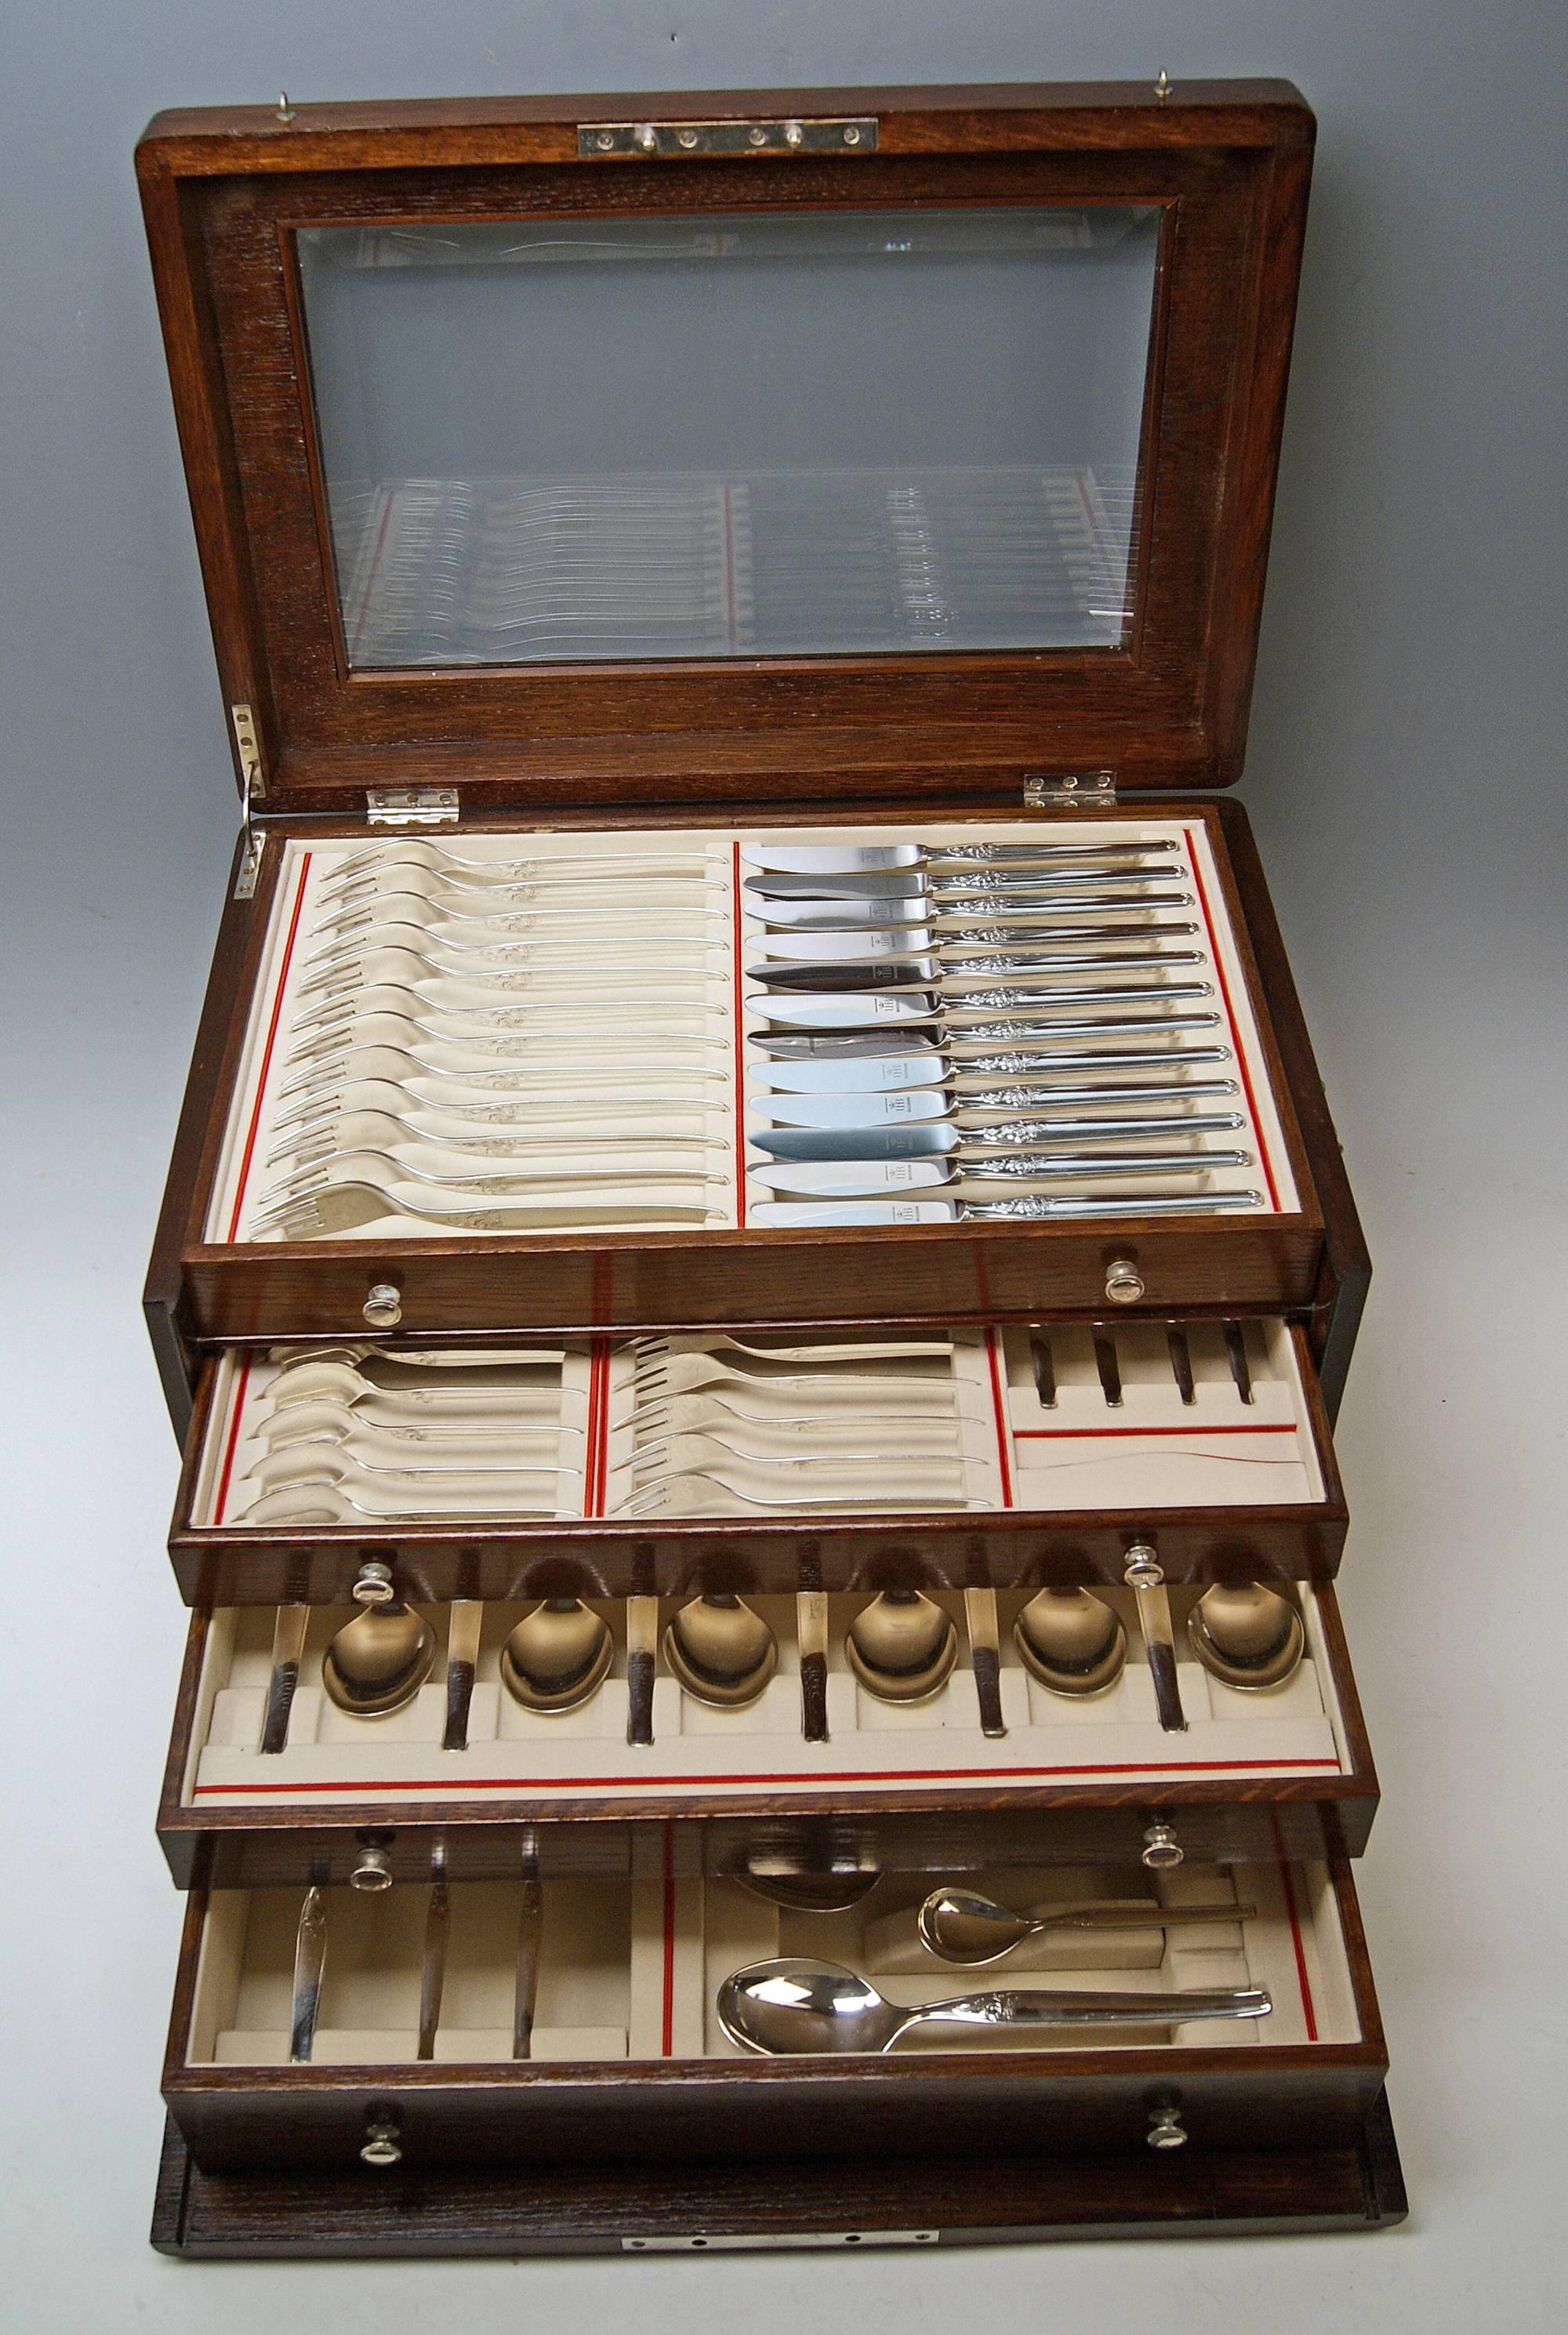 Silver 72-piece flatware (cutlery set) for 12 persons,
Made by Bruckmann & Sons, Germany / Heilbronn, circa 1960.

Gorgeous German cutlery set / flatware / dinnerware consisting of 72 pieces. Most elegant as well as rare design = Model Number 764